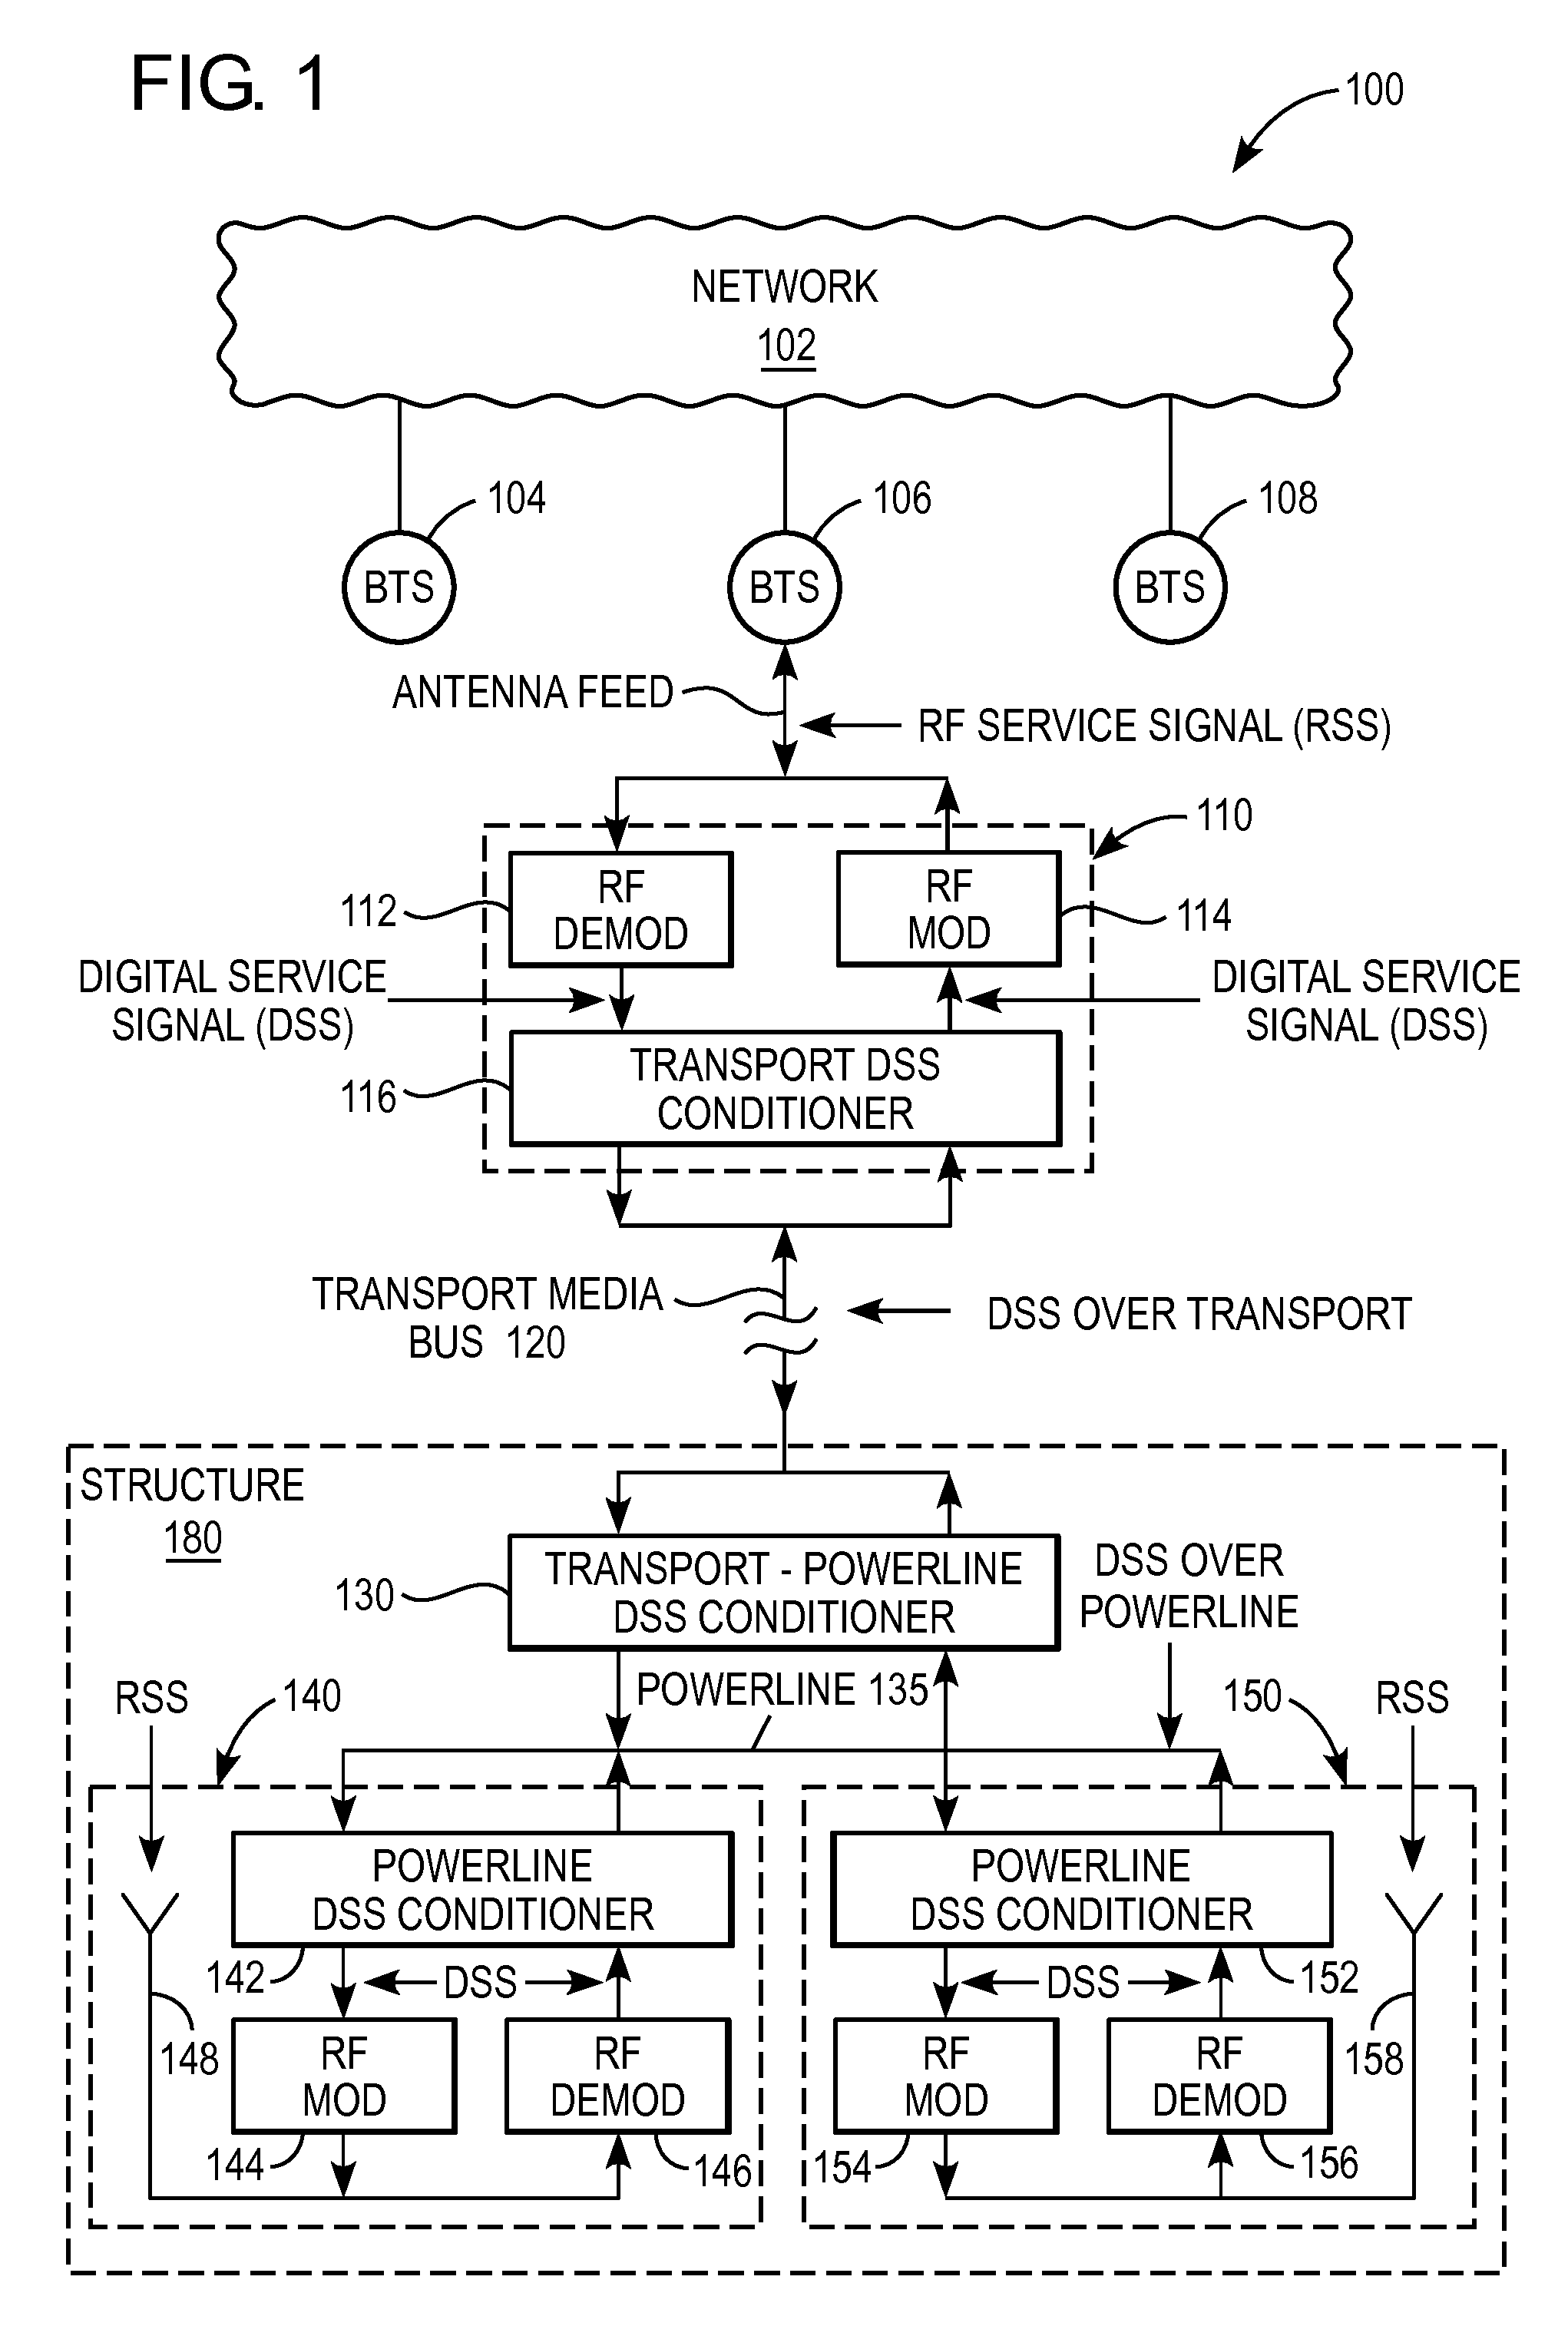 System and method for transmitting wireless digital service signals via power transmission lines